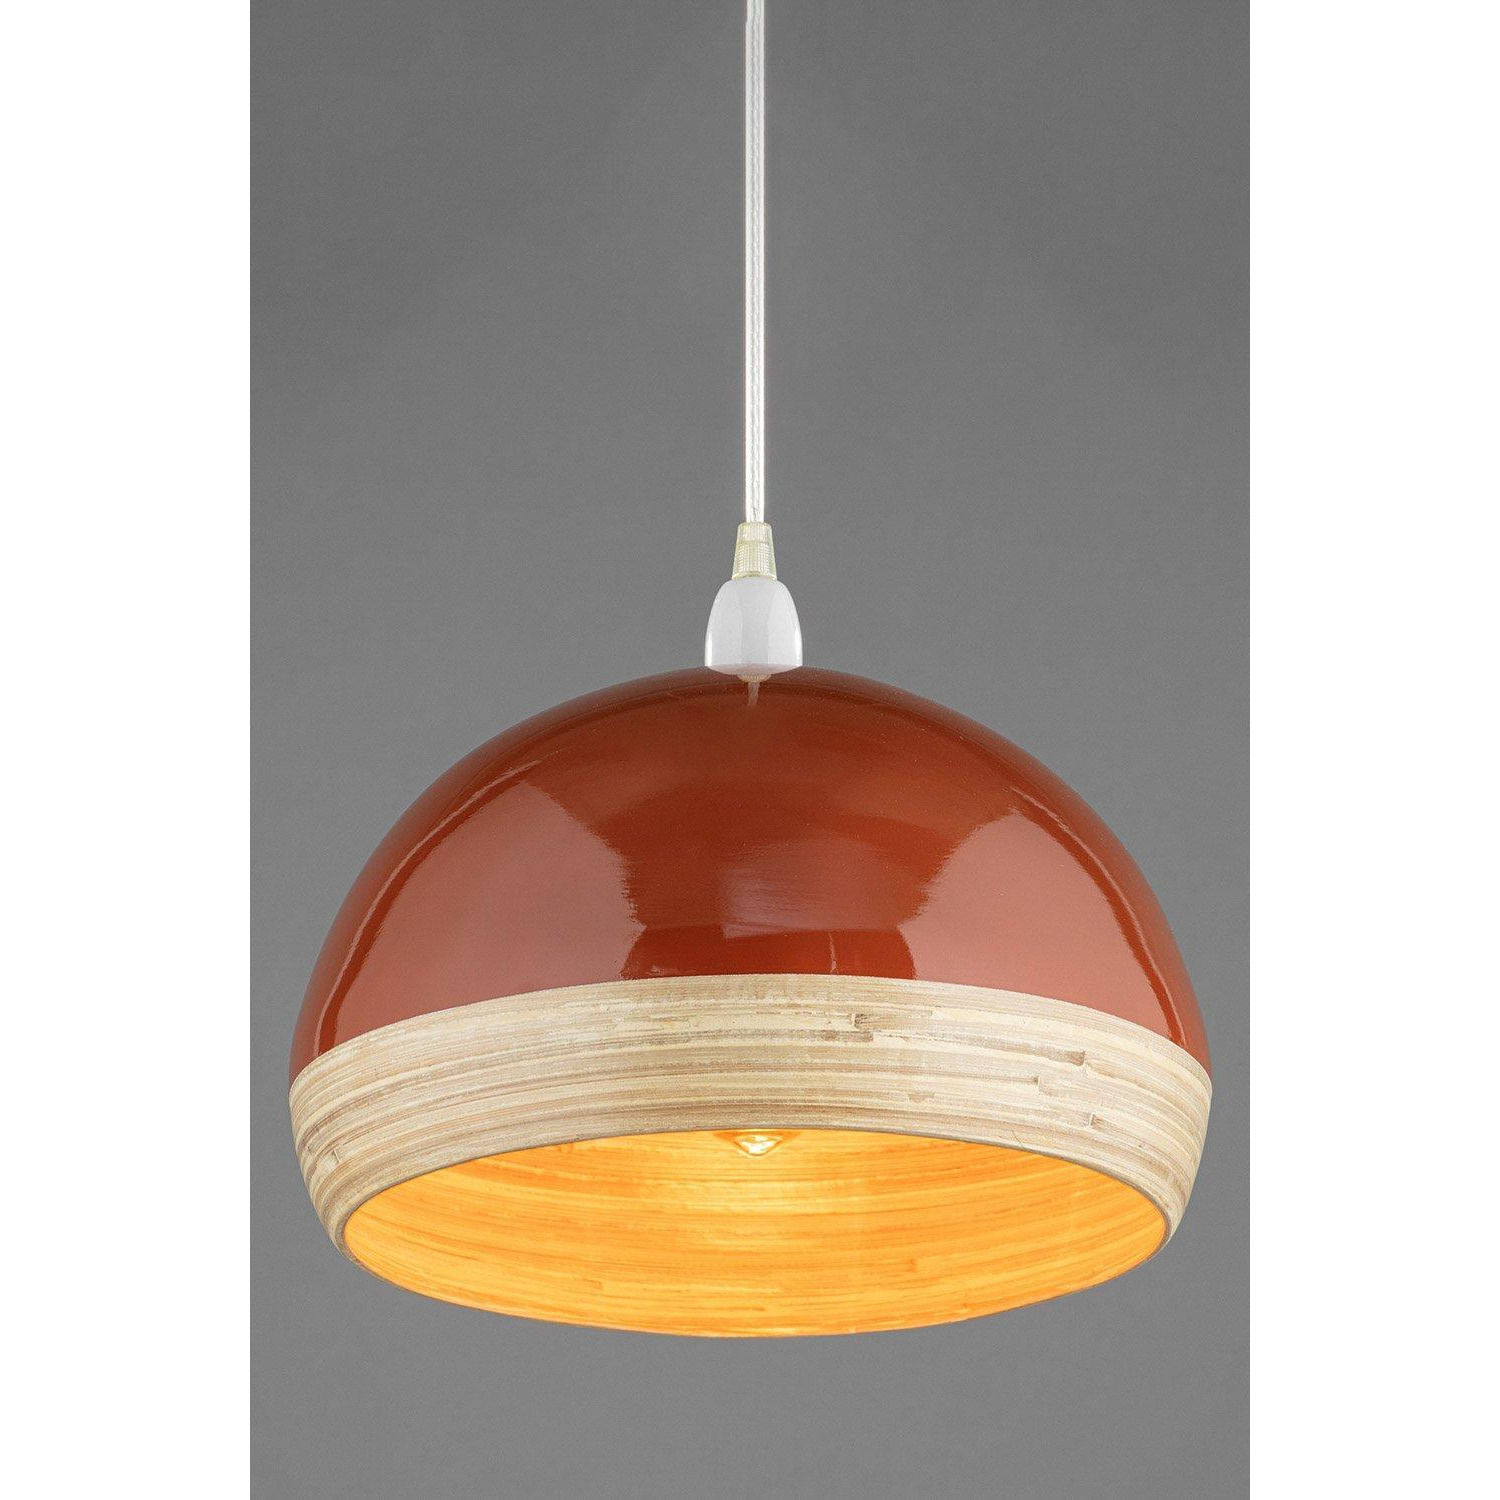 Dome Easy Fit Light Shade - image 1